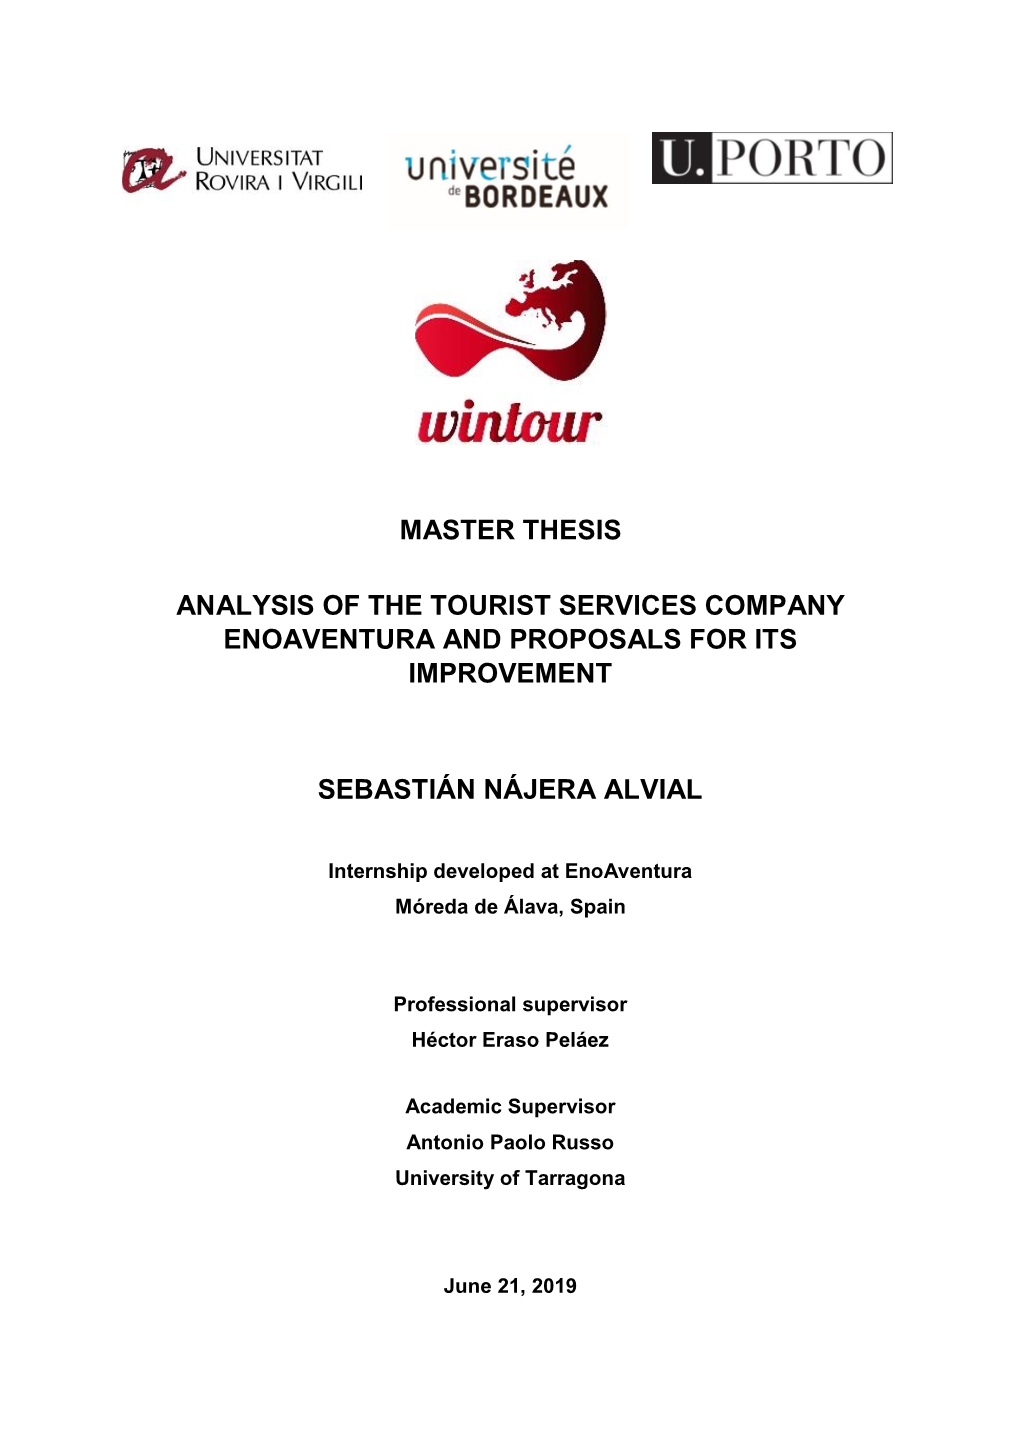 Master Thesis Analysis of the Tourist Services Company